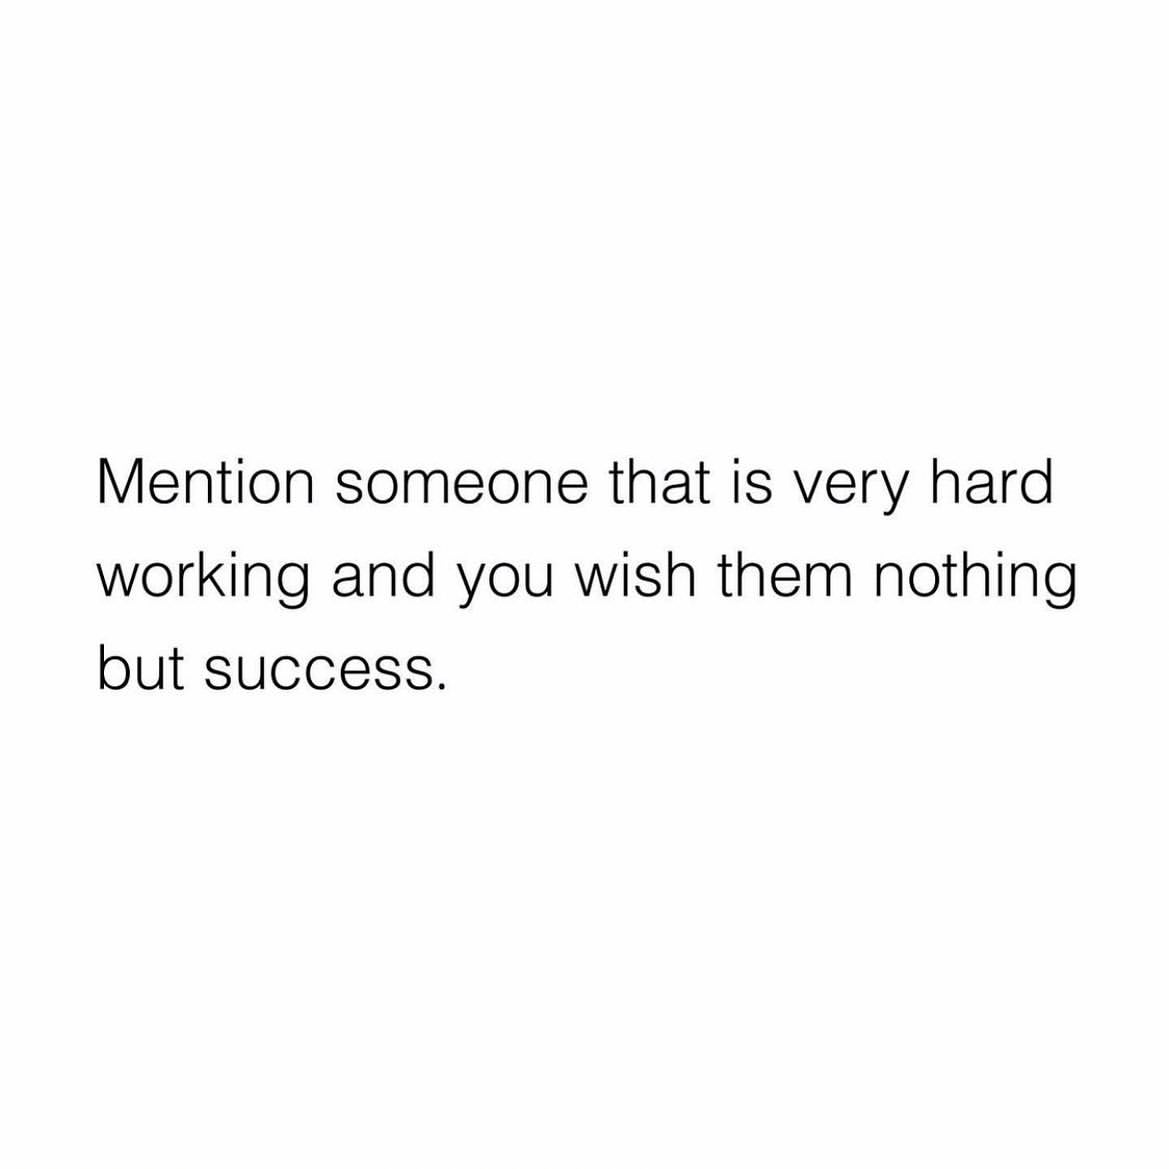 Mention someone that is very hard working and you wish them nothing but success.